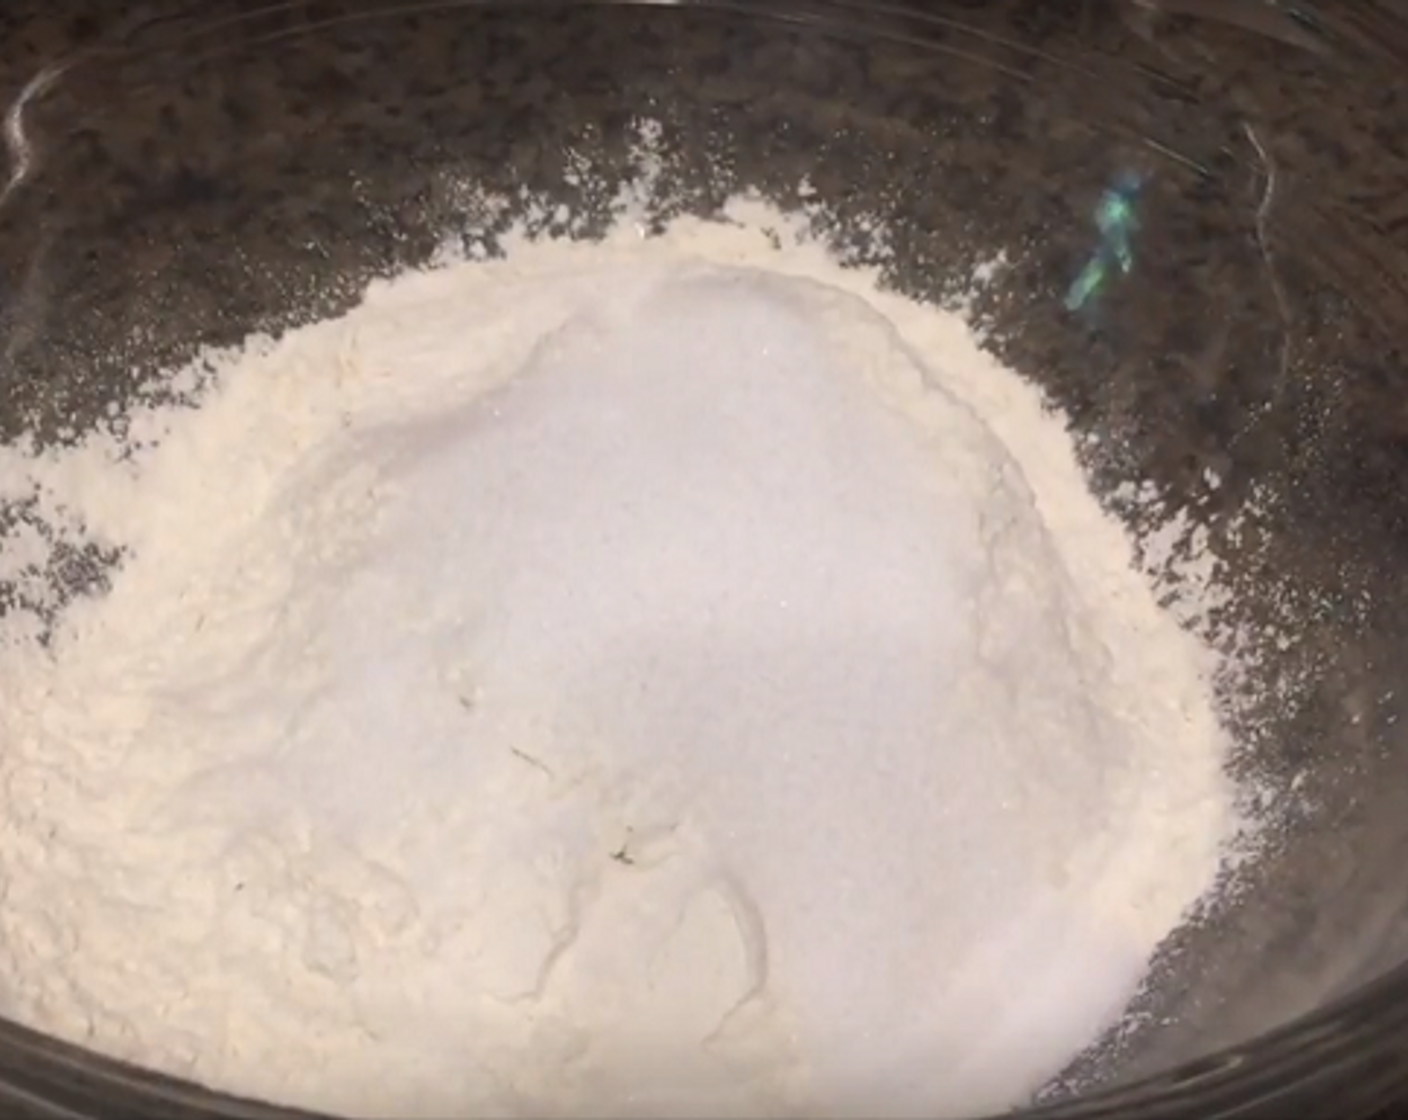 step 2 In a large mixing bowl, mix All-Purpose Flour (3 cups), Baking Powder (1 Tbsp), Salt (1 tsp), and Granulated Sugar (3 Tbsp).